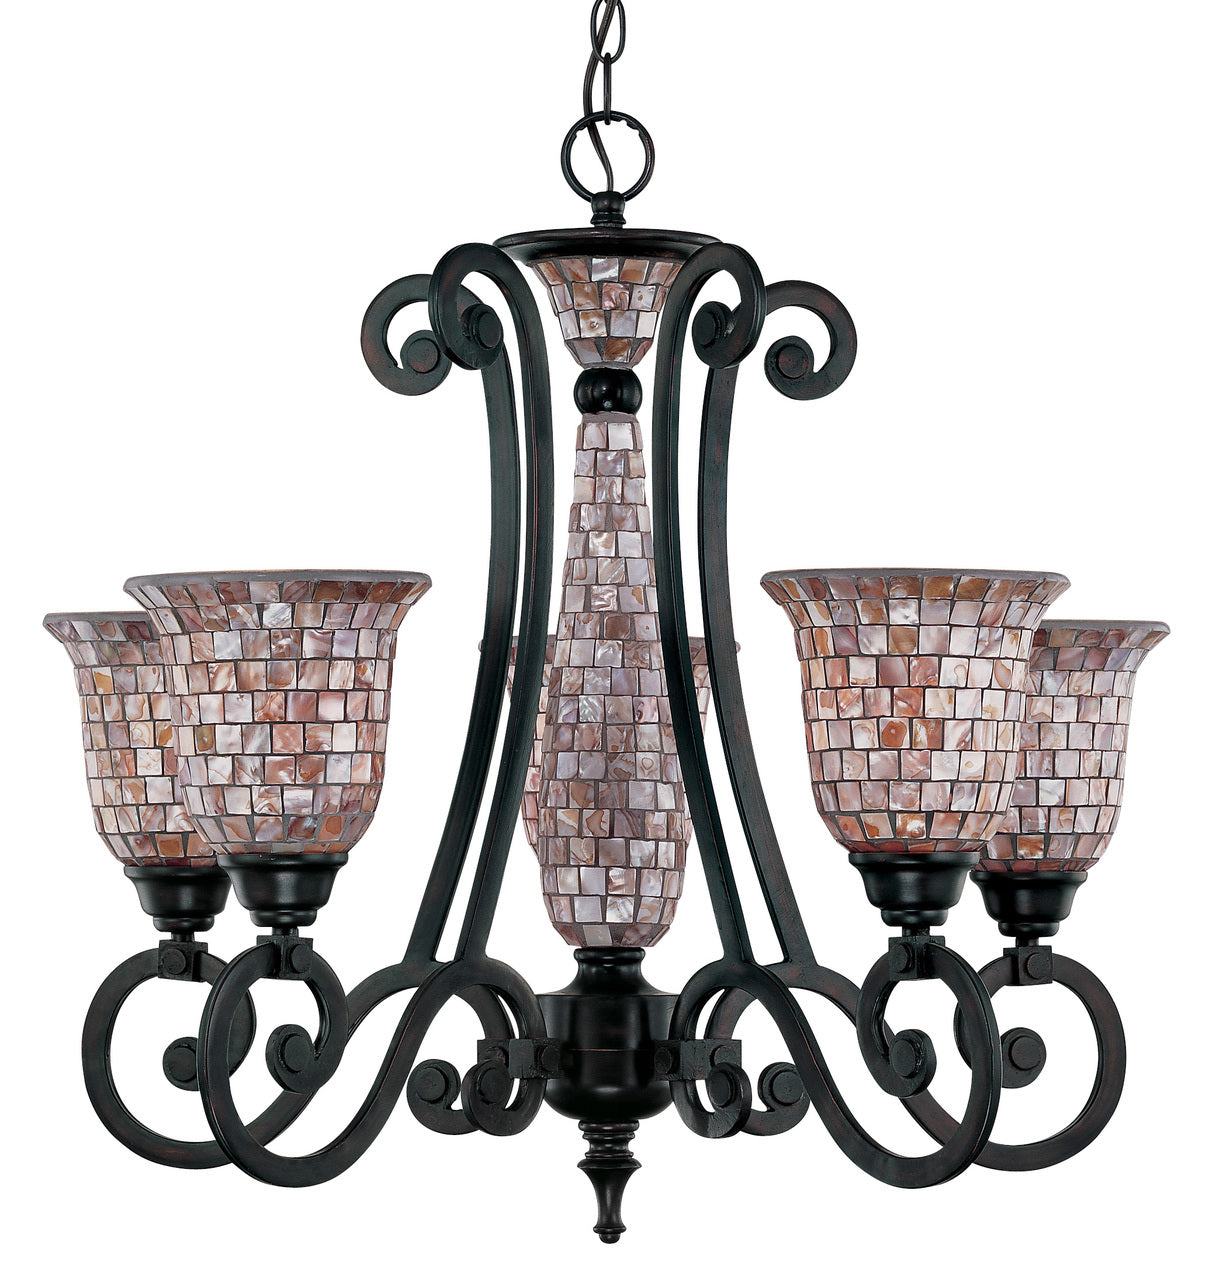 Classic Lighting 71145 ORB Pearl River Wrought Iron Chandelier in Oil-Rubbed Bronze